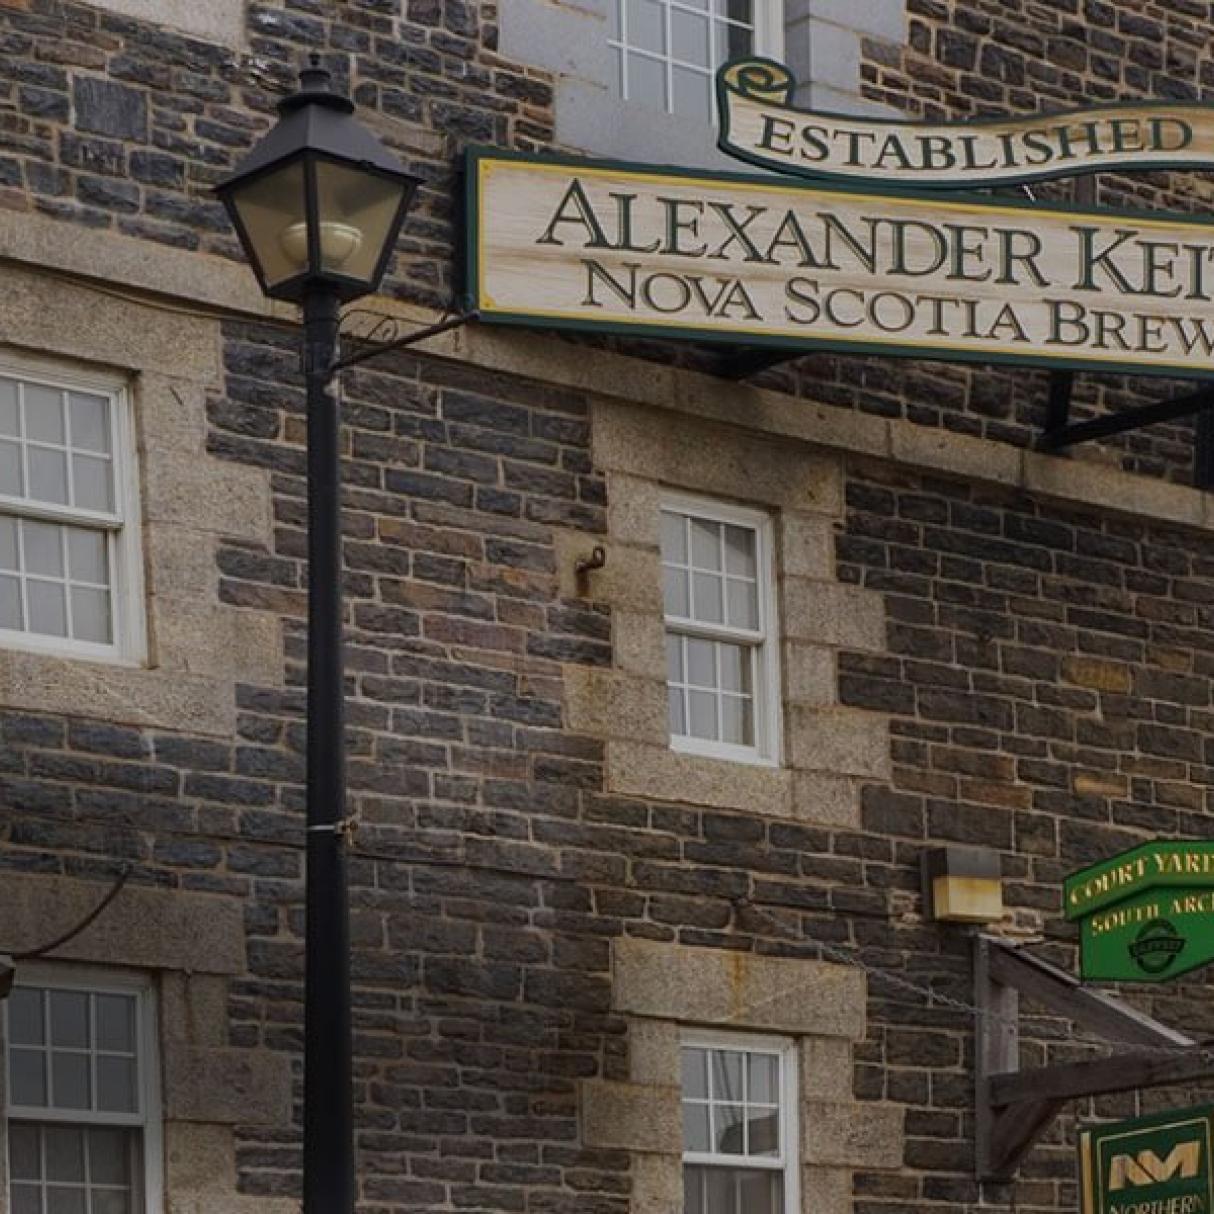 Alexander Keith's brewery